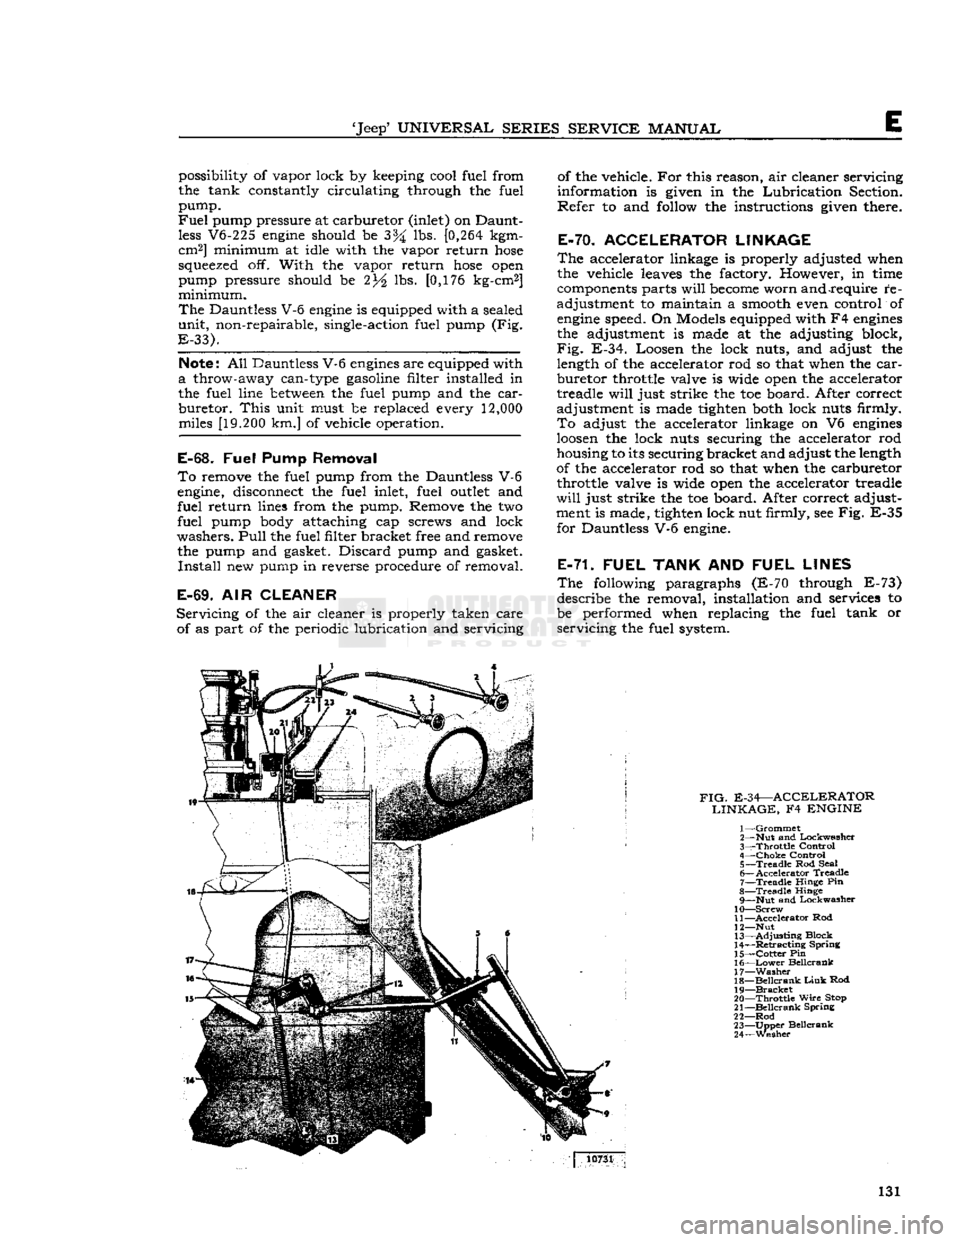 JEEP CJ 1953  Service Manual 
Jeep
 UNIVERSAL SERIES SERVICE
 MANUAL 

E 
possibility of vapor lock by keeping cool fuel from 
the tank constantly circulating through the fuel 
pump. 

Fuel
 pump pressure at carburetor (inlet) 